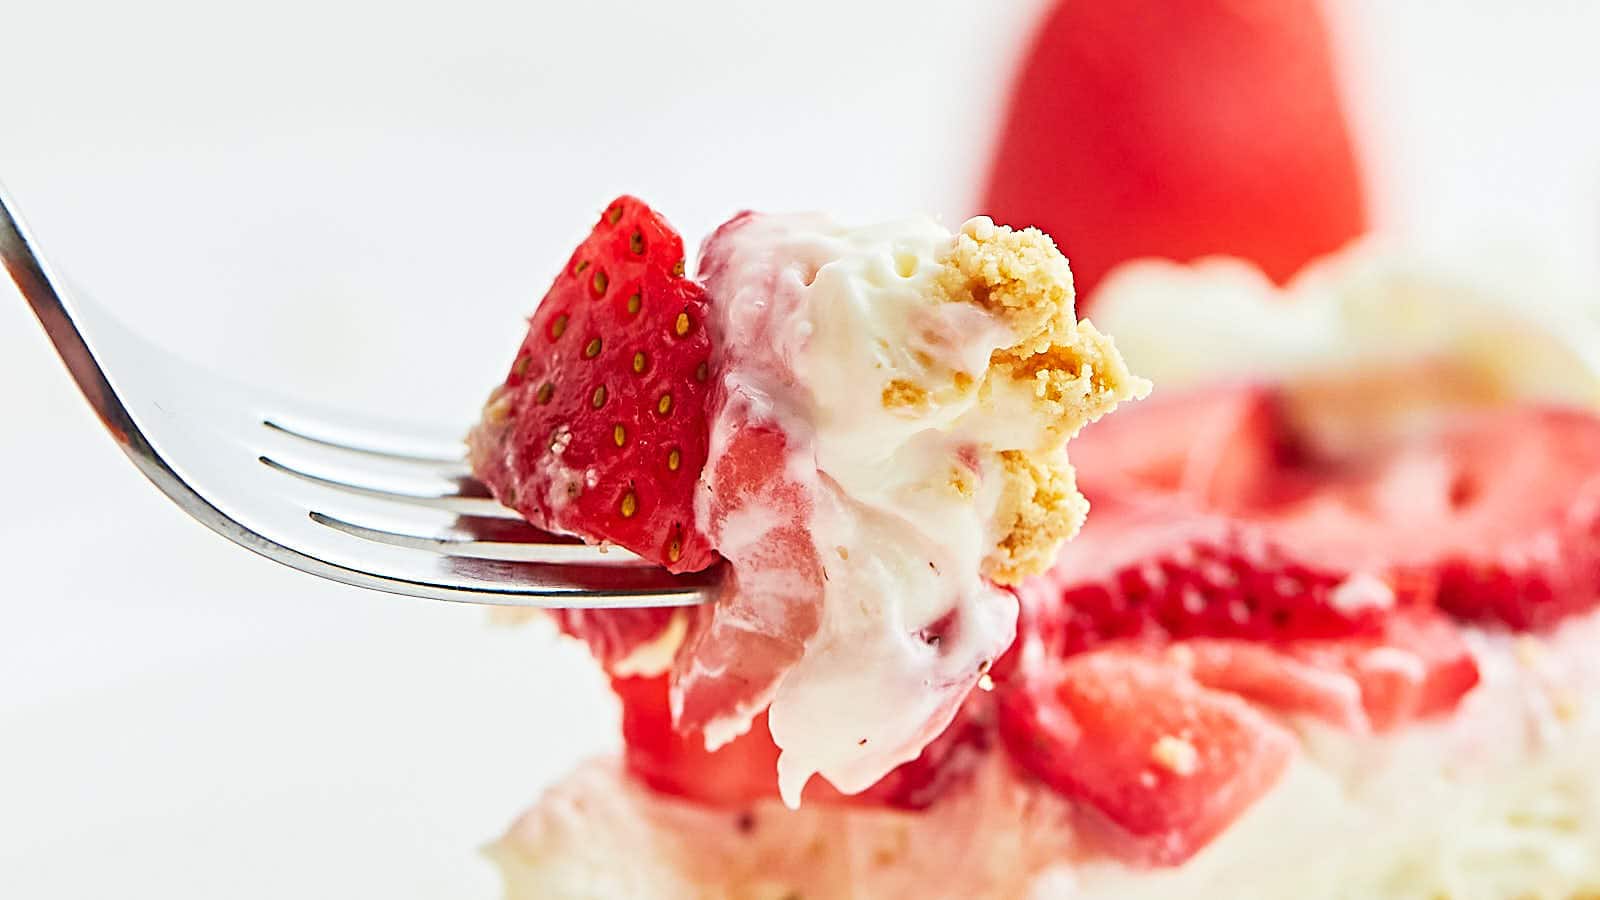 No-Bake Strawberry Pie recipe by Cheerful Cook.